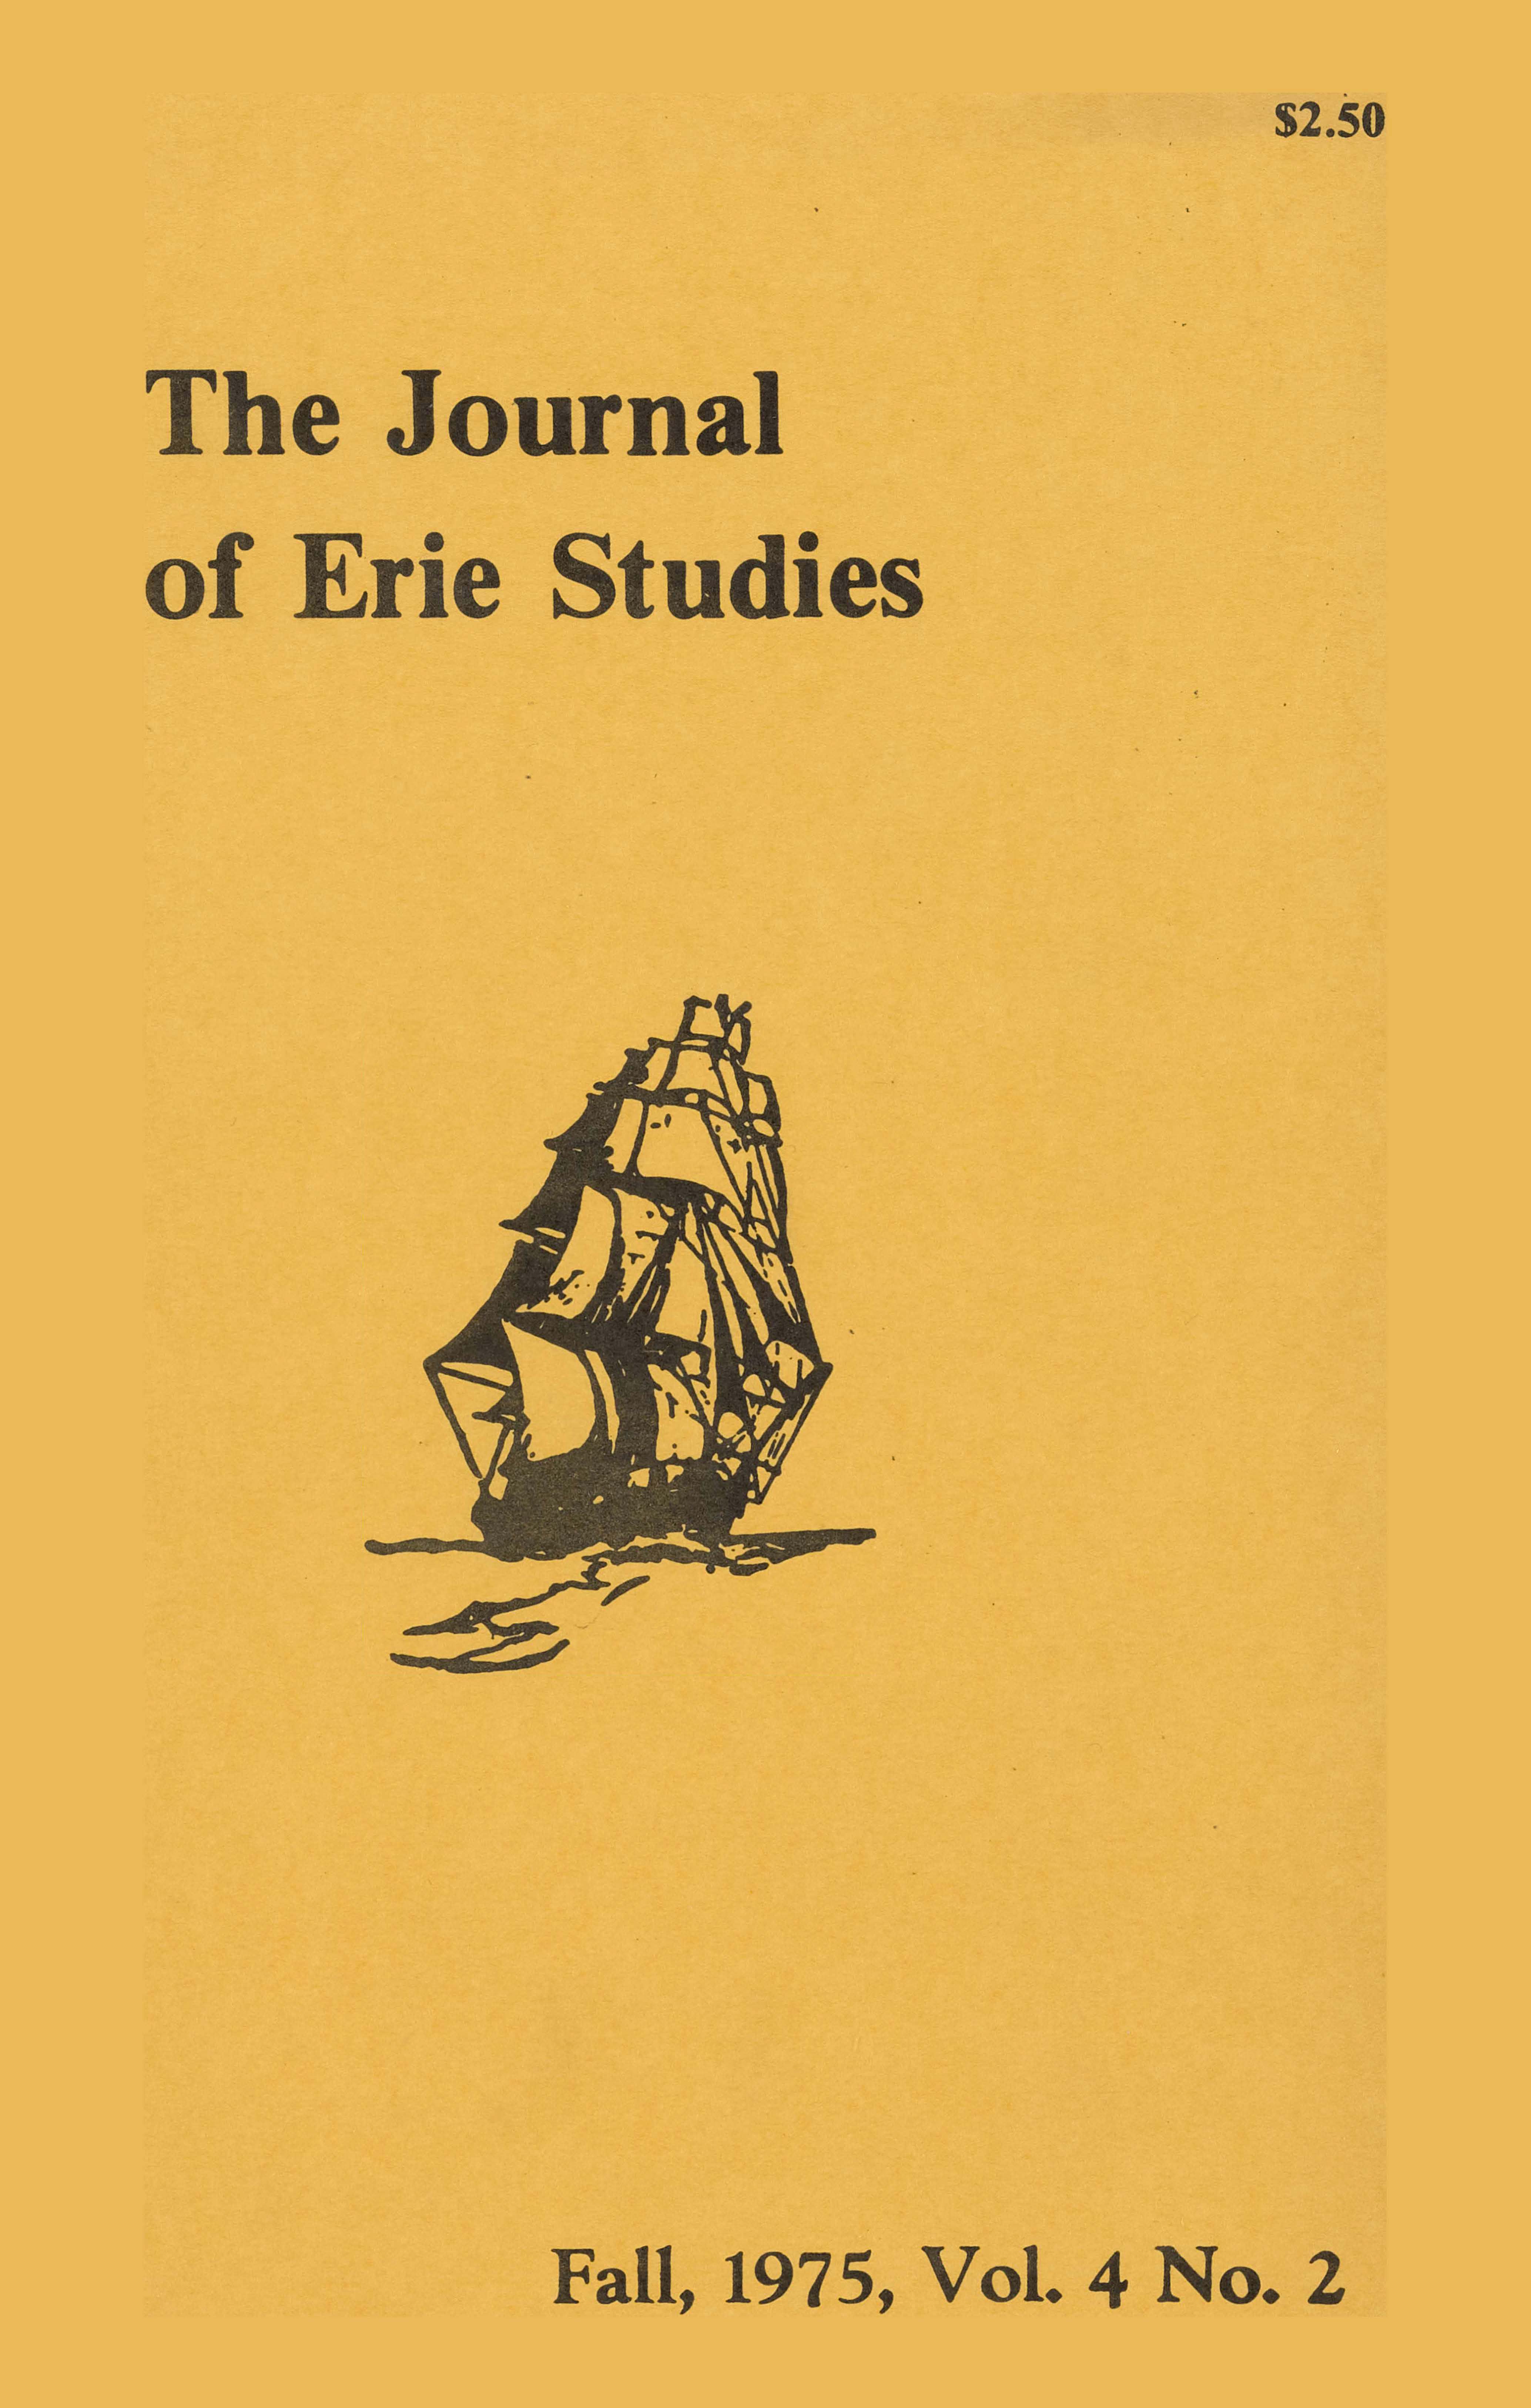 Cover of the fall 1975 issue of The Journal of Erie Studies.